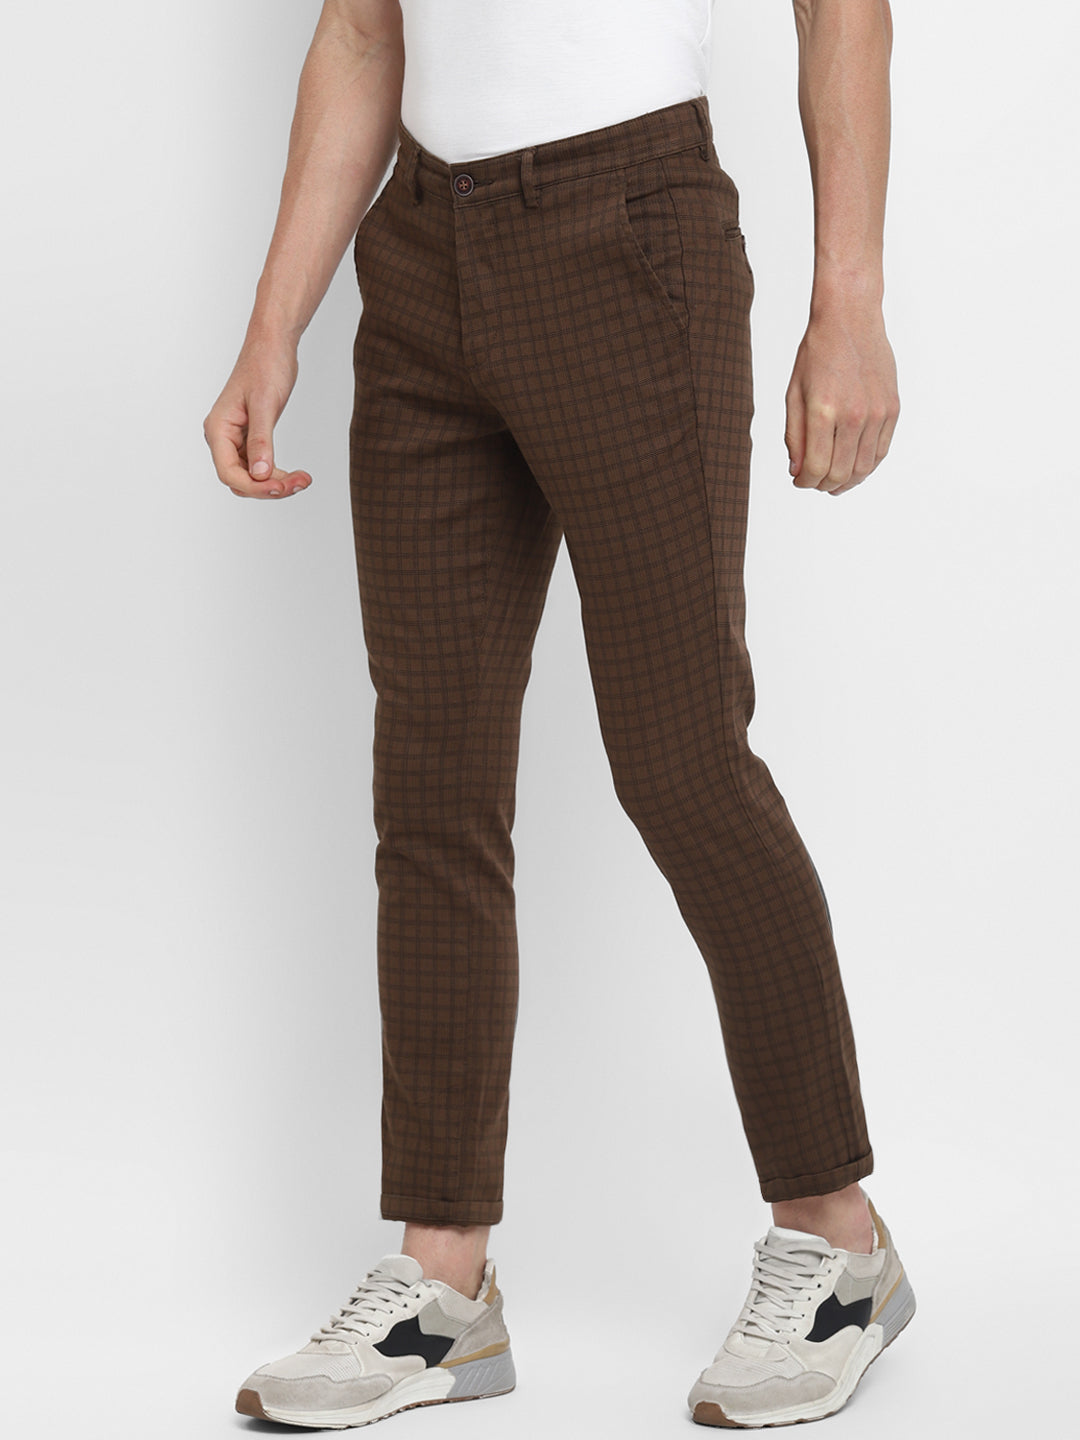 Brown Striped Narrow Fit Trouser